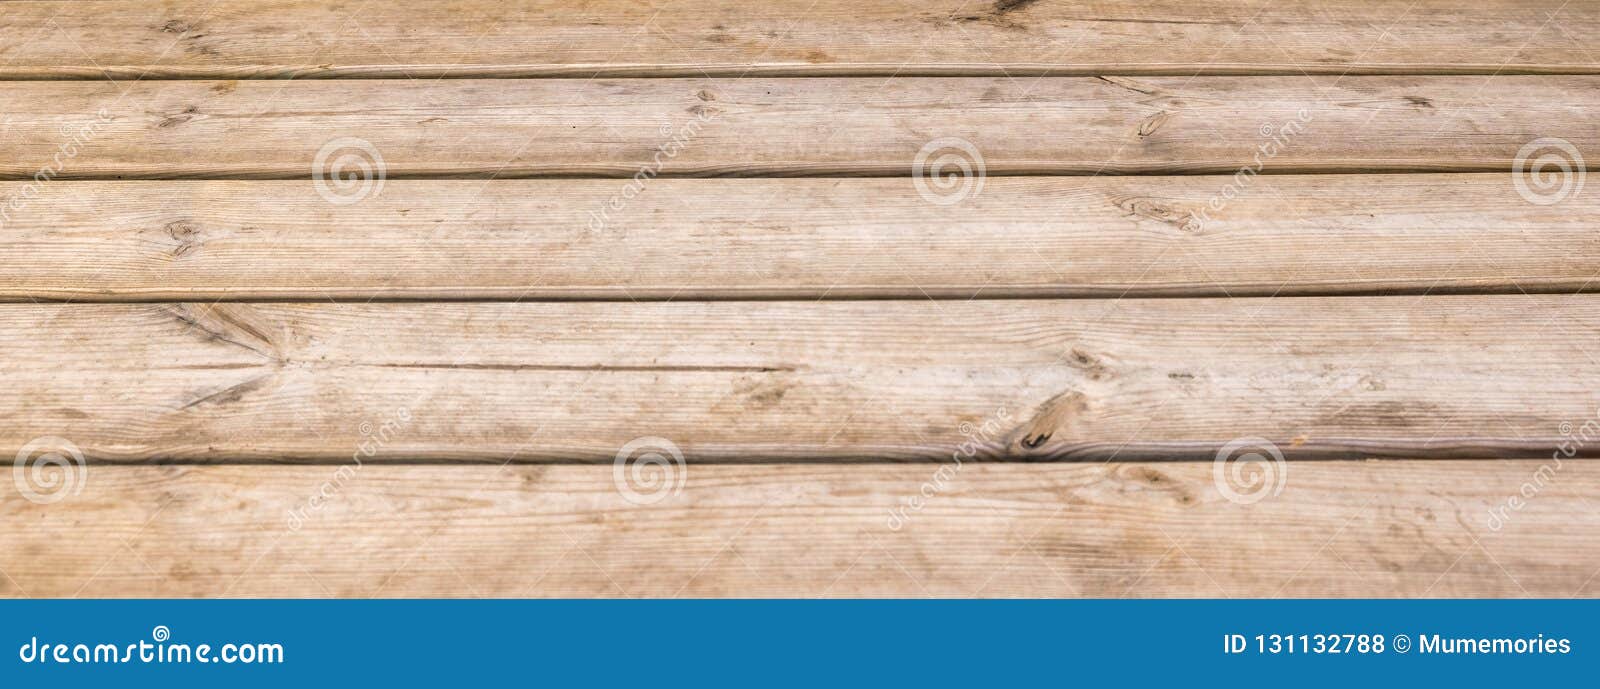 Brown wooden striped texture plank board Stock Photo by Mumemories